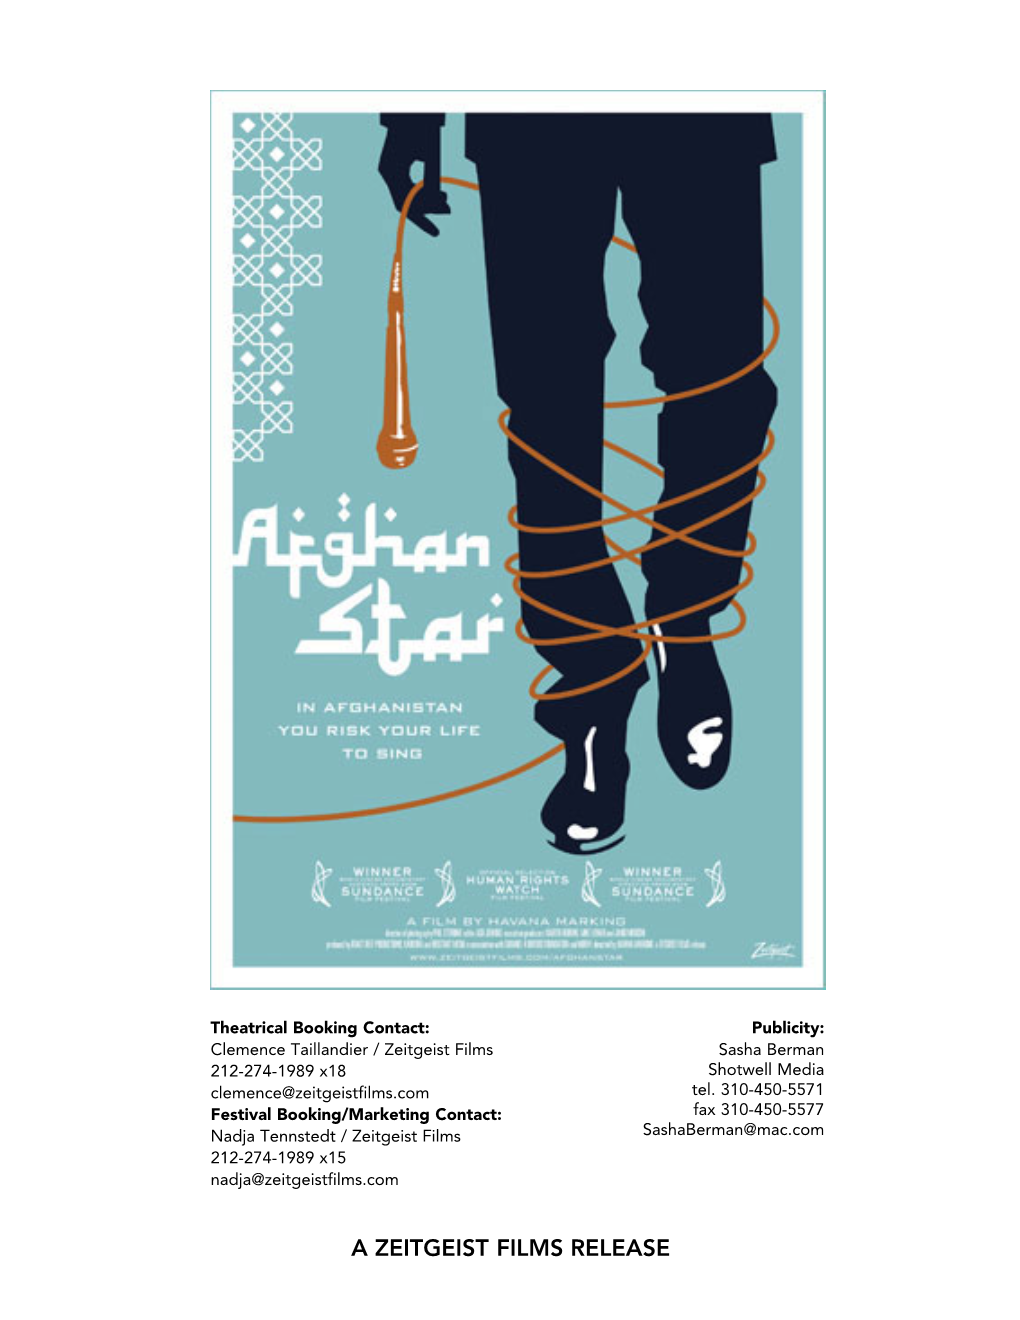 A ZEITGEIST FILMS RELEASE in Afghanistan You Risk Your Life to Sing